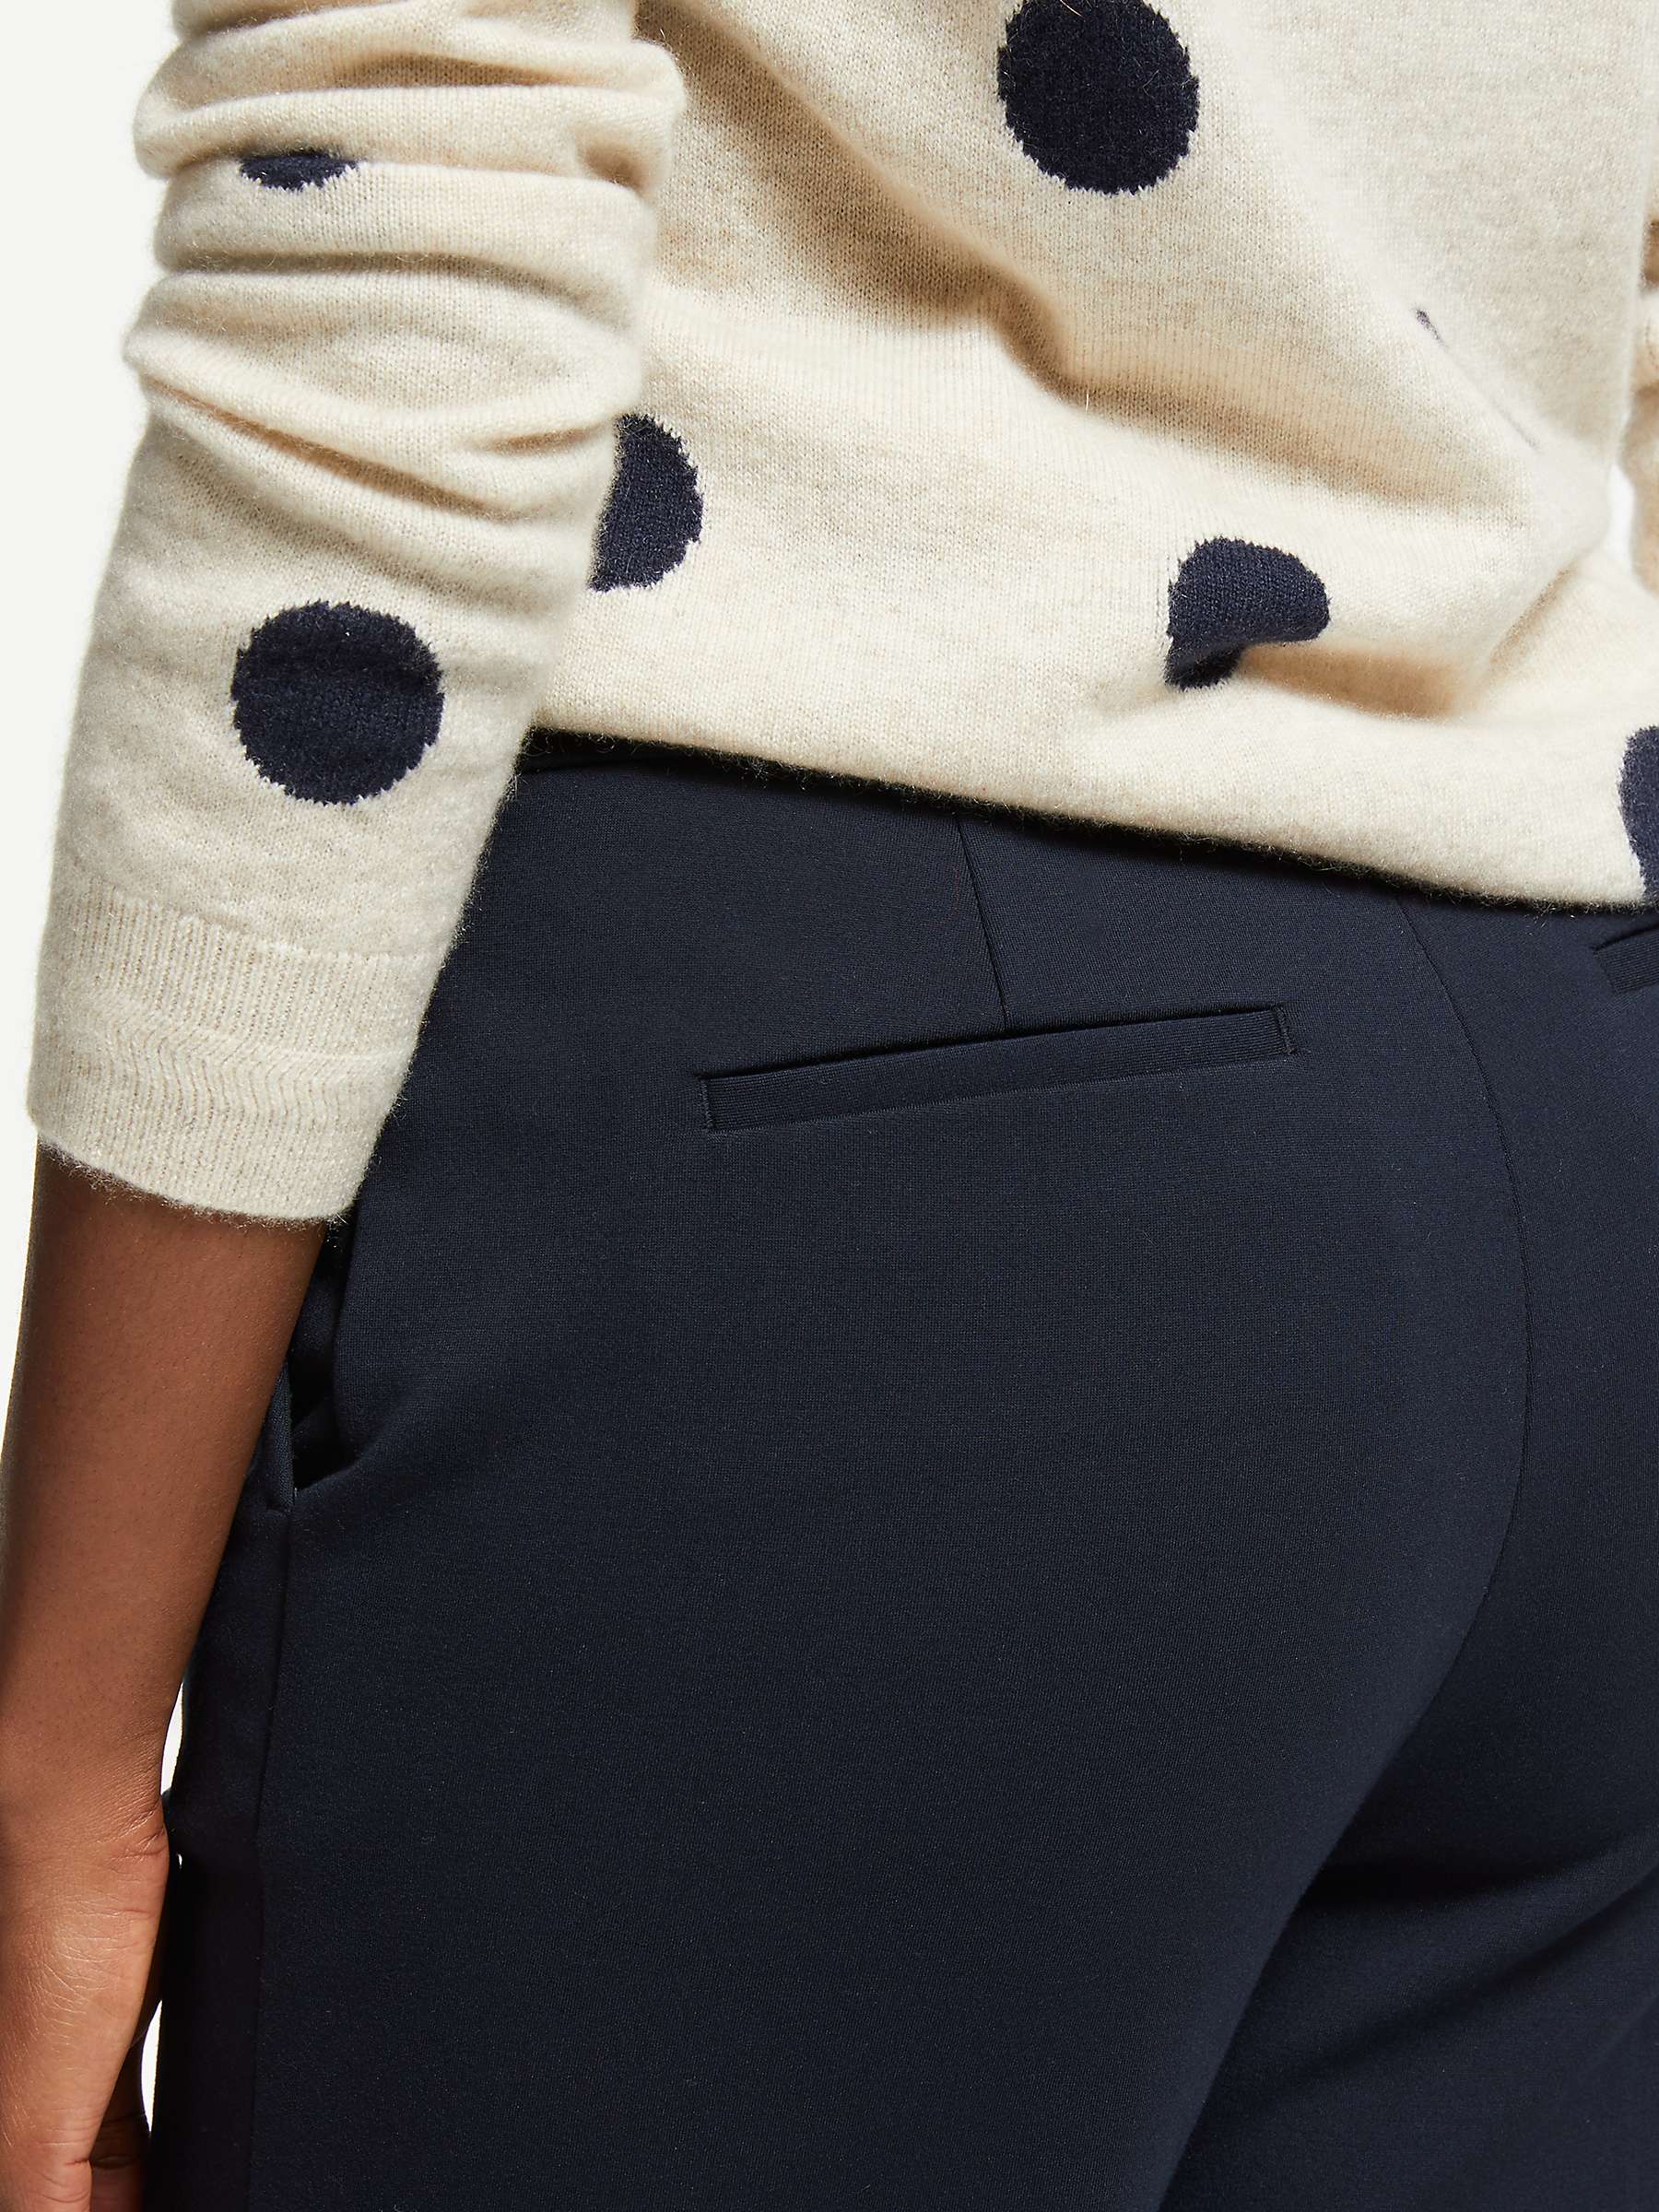 Buy Boden Westbourne Ponte Trousers, Navy Online at johnlewis.com